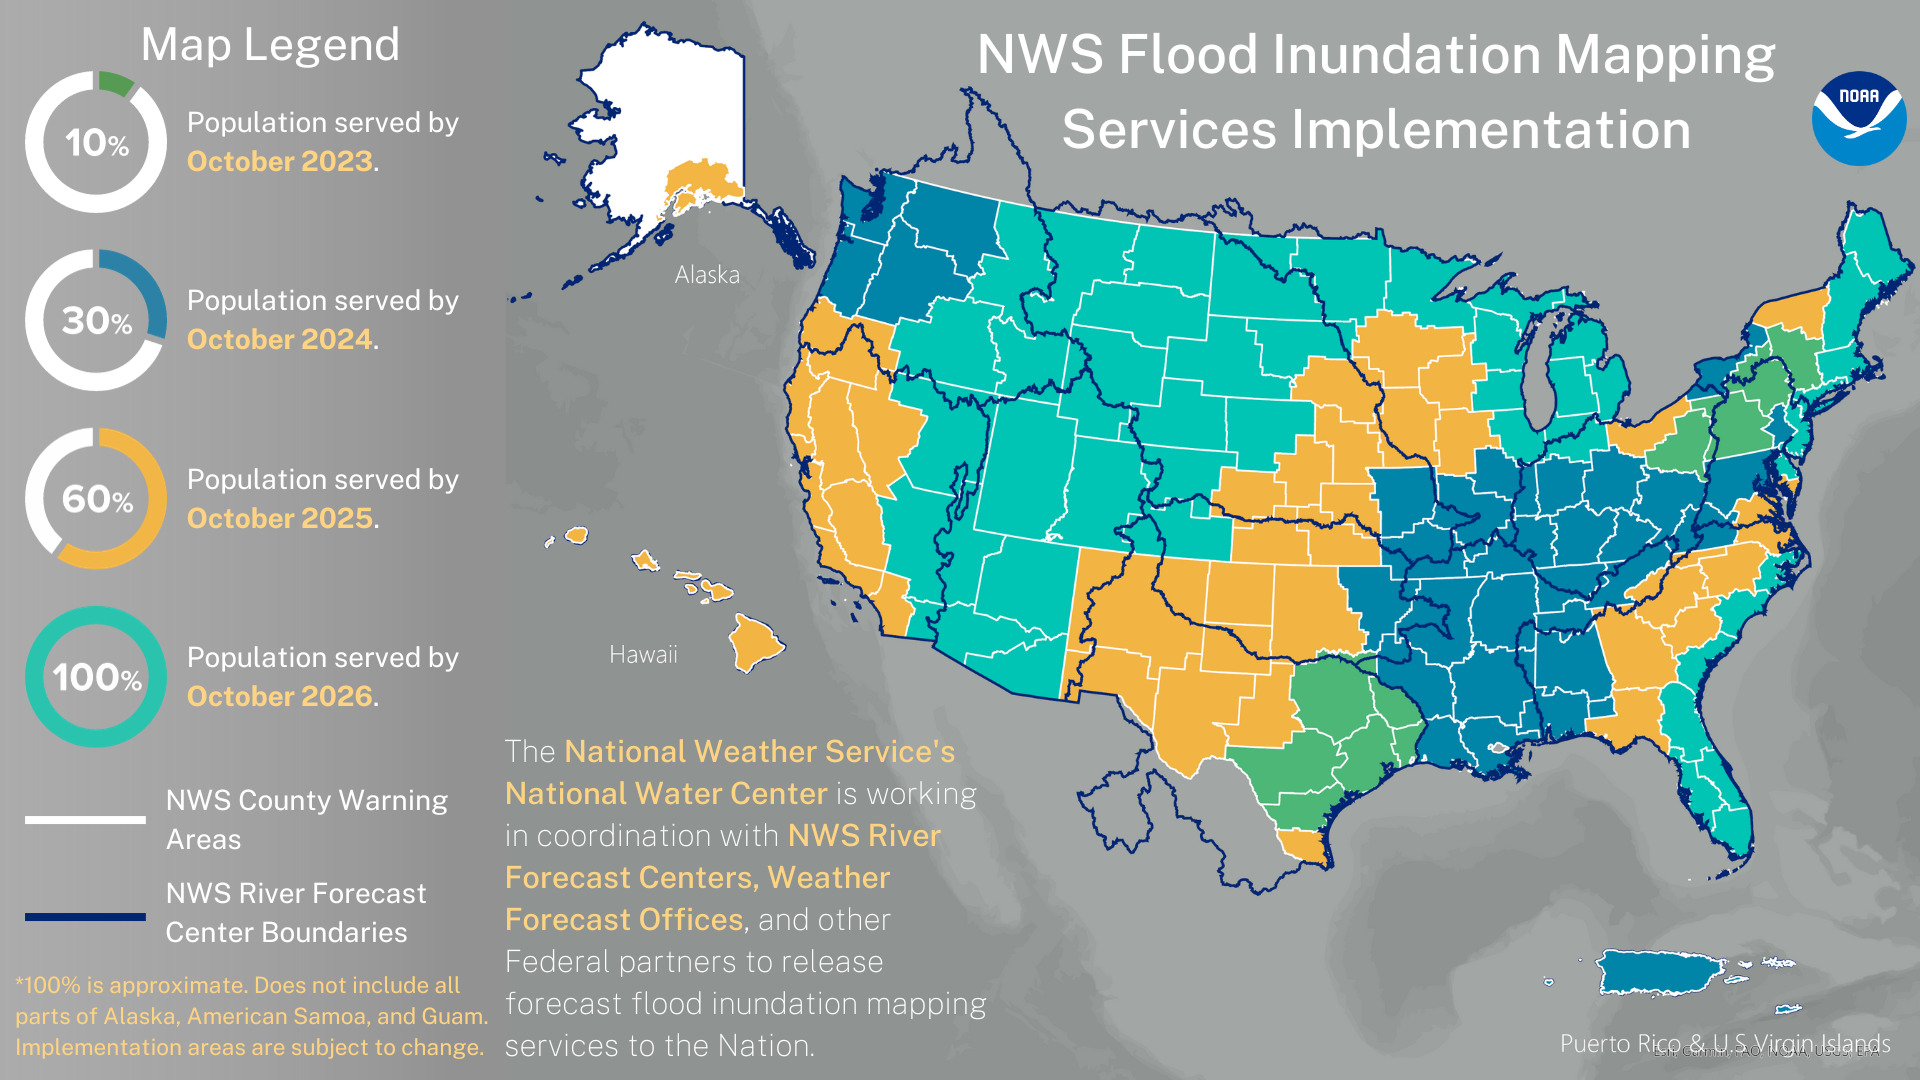 Image showing NOAA’s new experimental flood inundation maps that are currently available to 10% of the population, shown in green. These services will expand to nearly 100% of the population by 2026. Credit NOAA